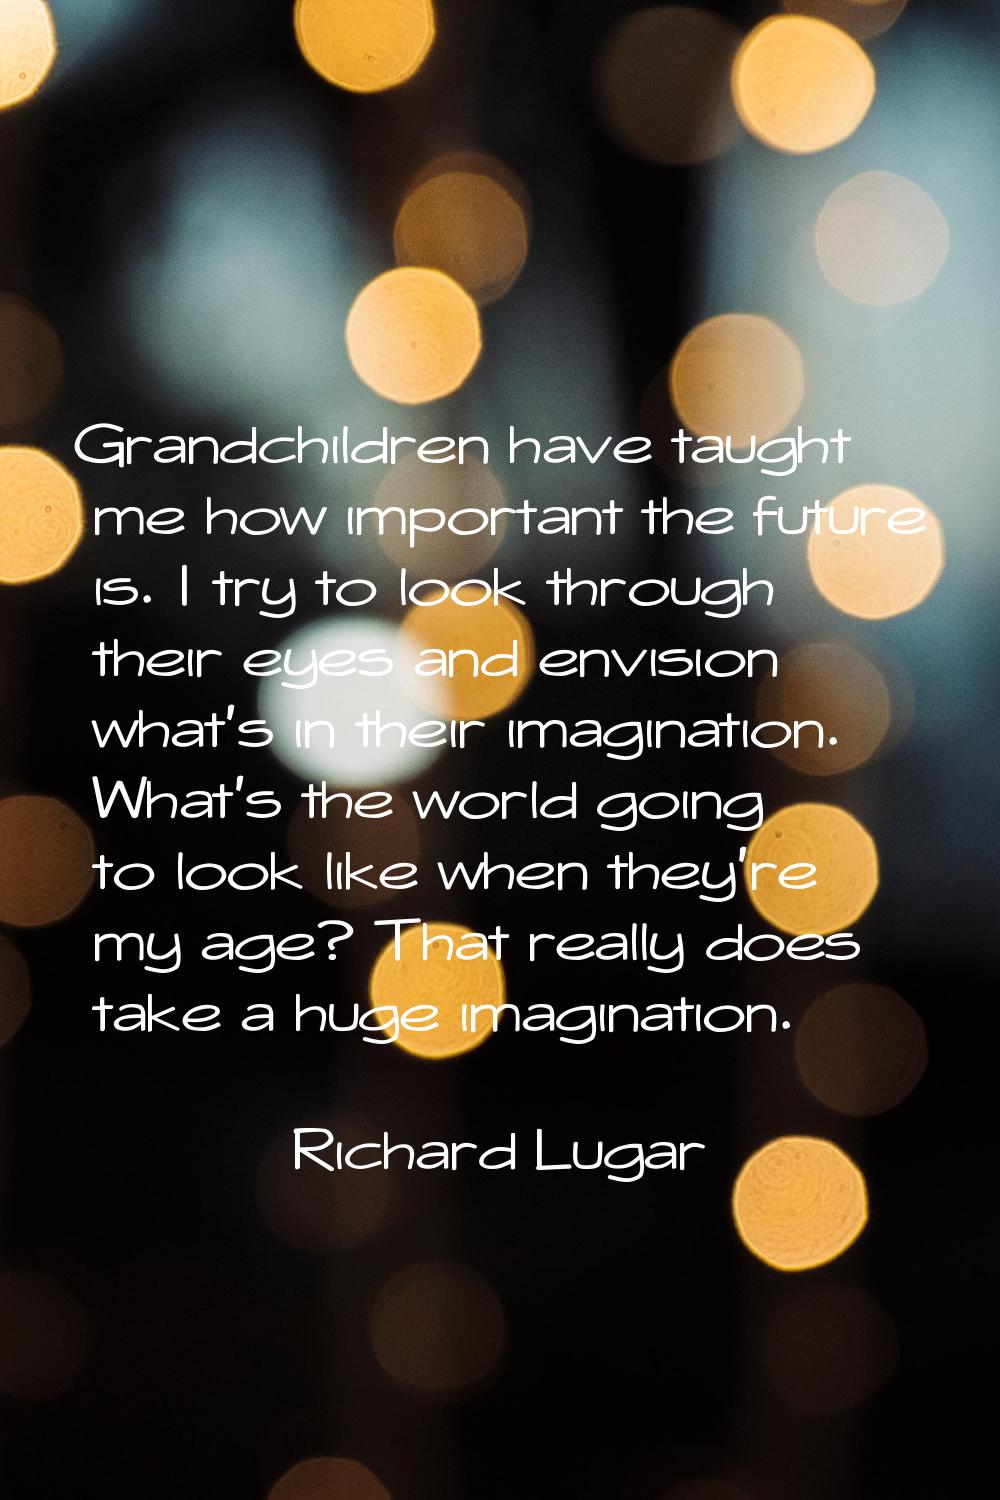 Grandchildren have taught me how important the future is. I try to look through their eyes and envi